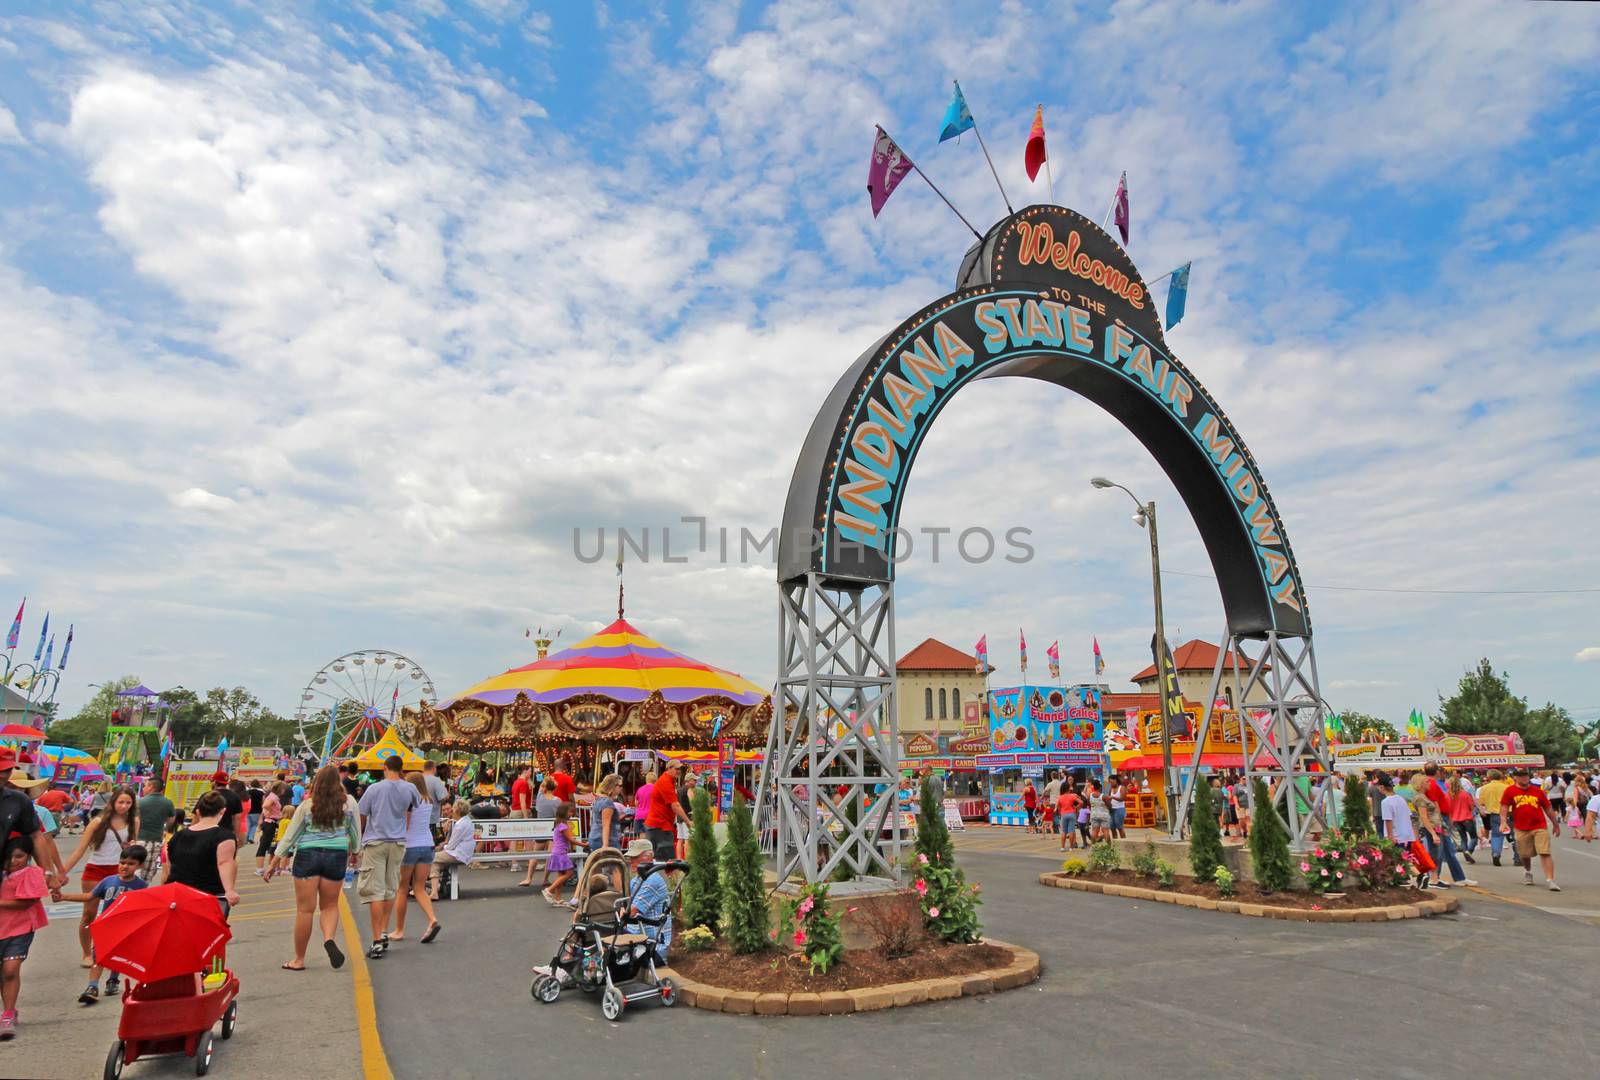 INDIANAPOLIS, INDIANA - AUGUST 12: Fairgoers at the main entrance to the Midway of the Indiana State Fair on August 12, 2012. This very popular fair hosts more than 850,000 people every August.